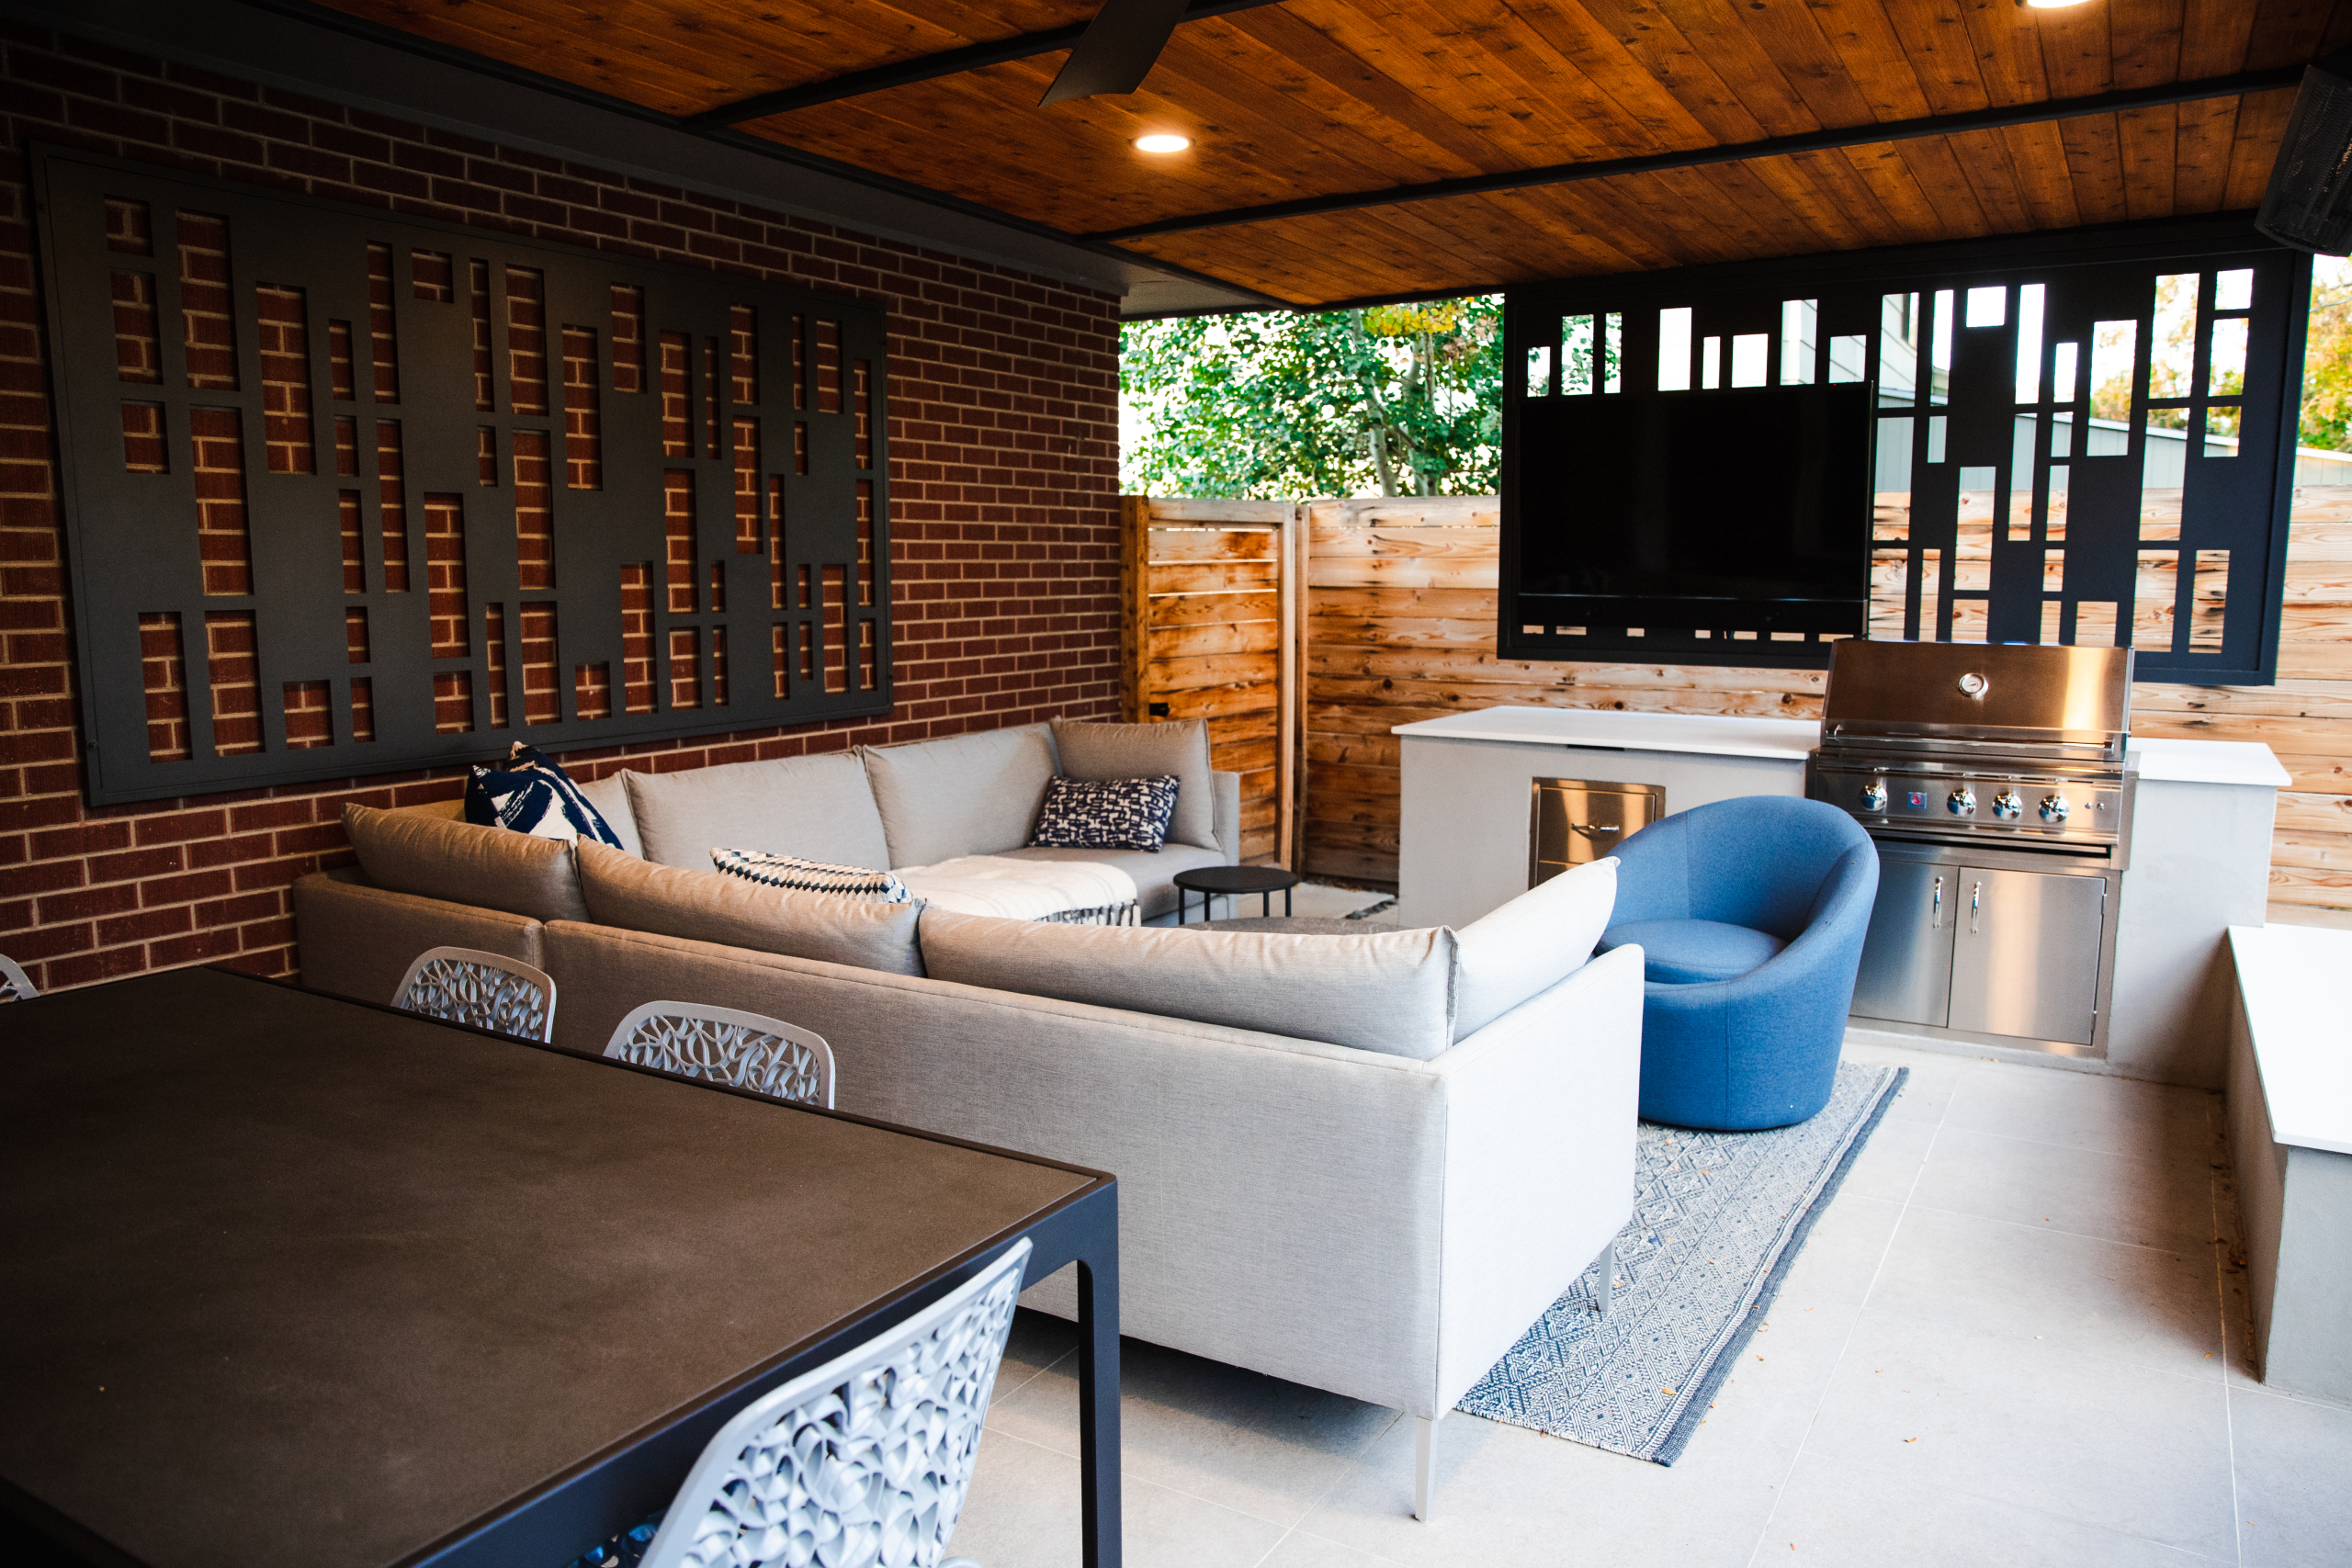 Outdoor Living Room With Outdoor Kitchen and TV denver co